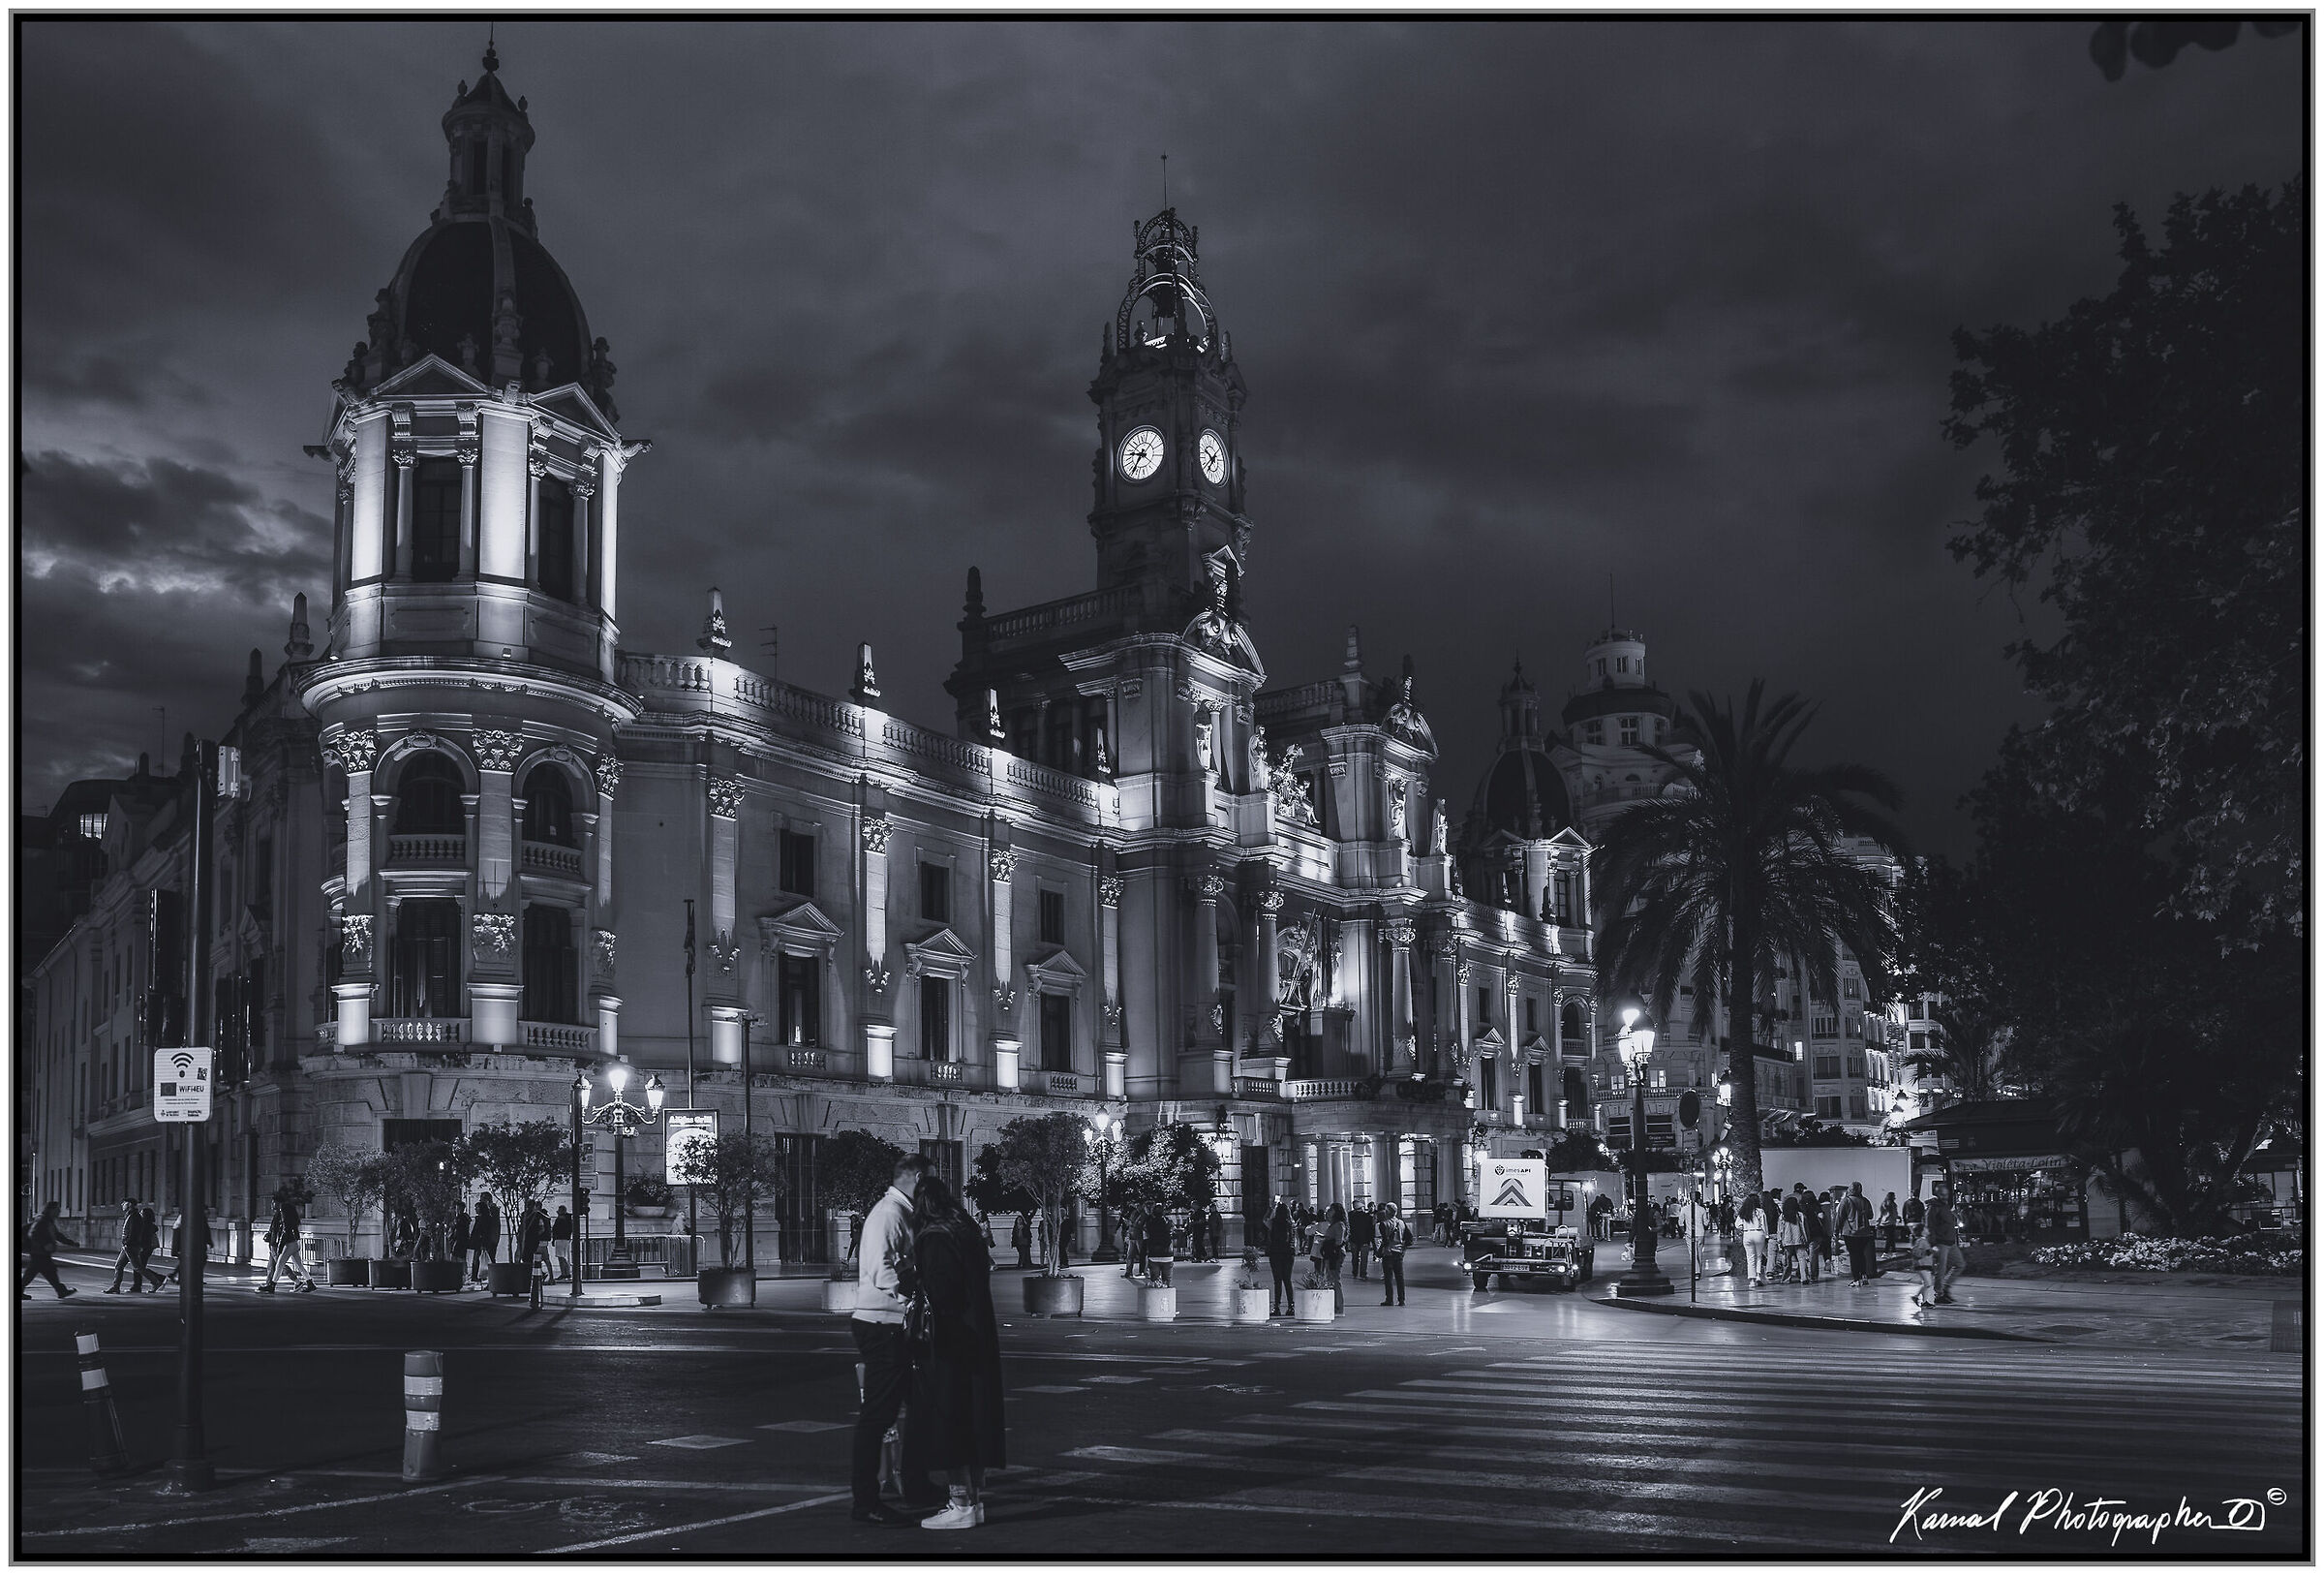 On the night streets of Valencia ...